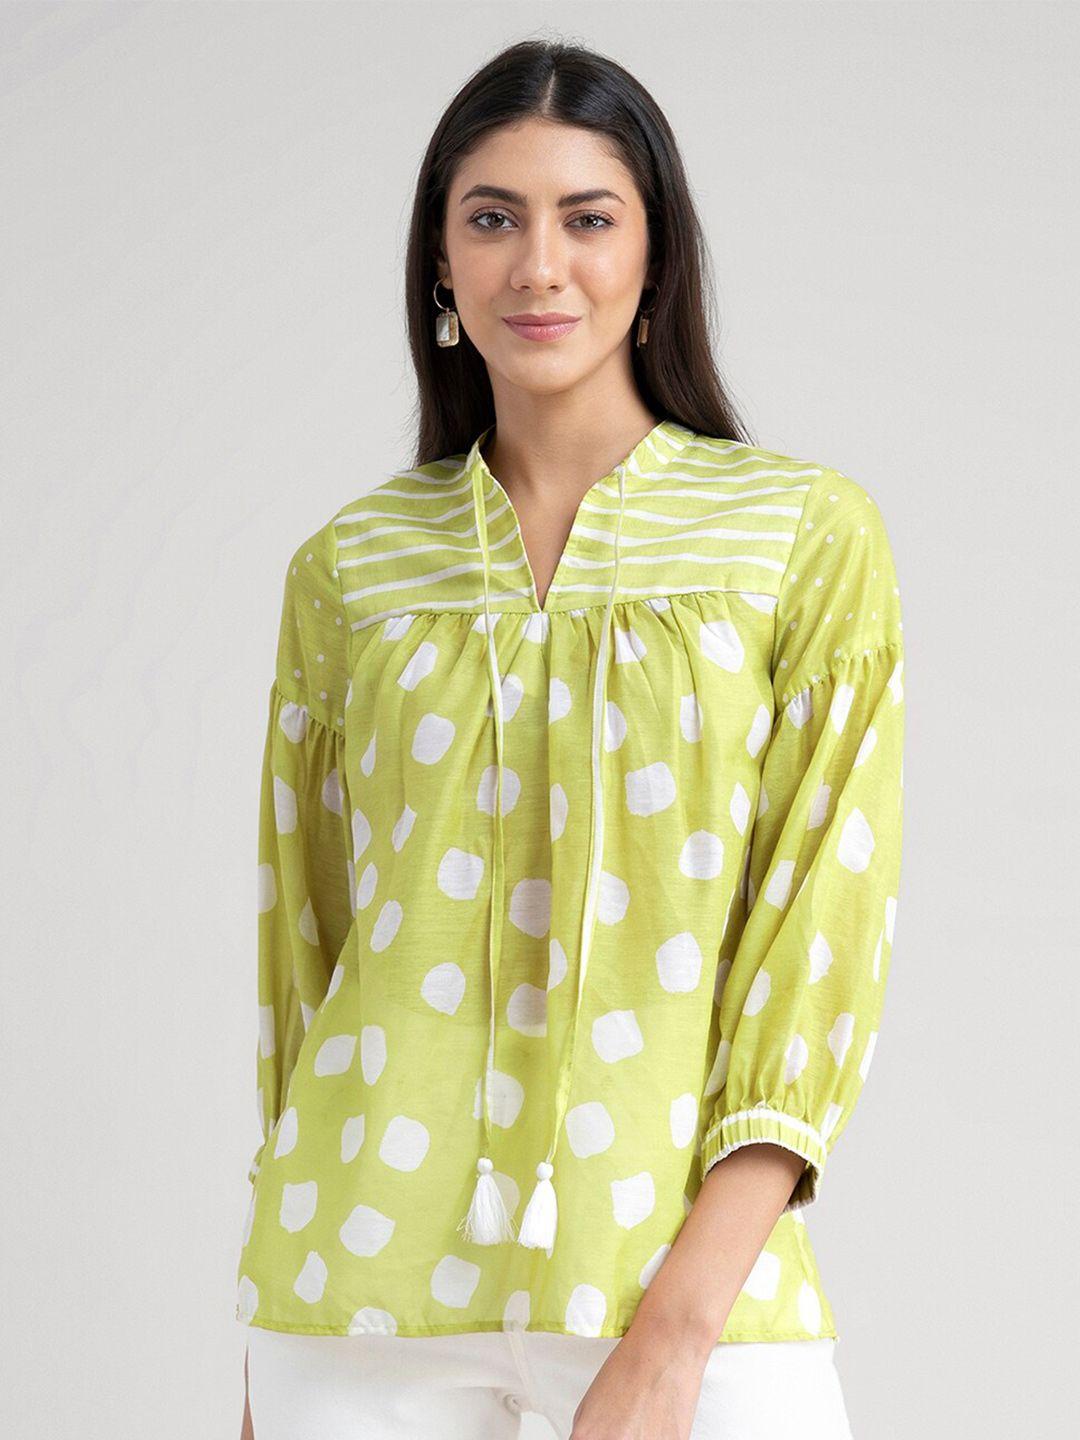 marigold-by-fablestreet-lime-green-print-tie-up-neck-top